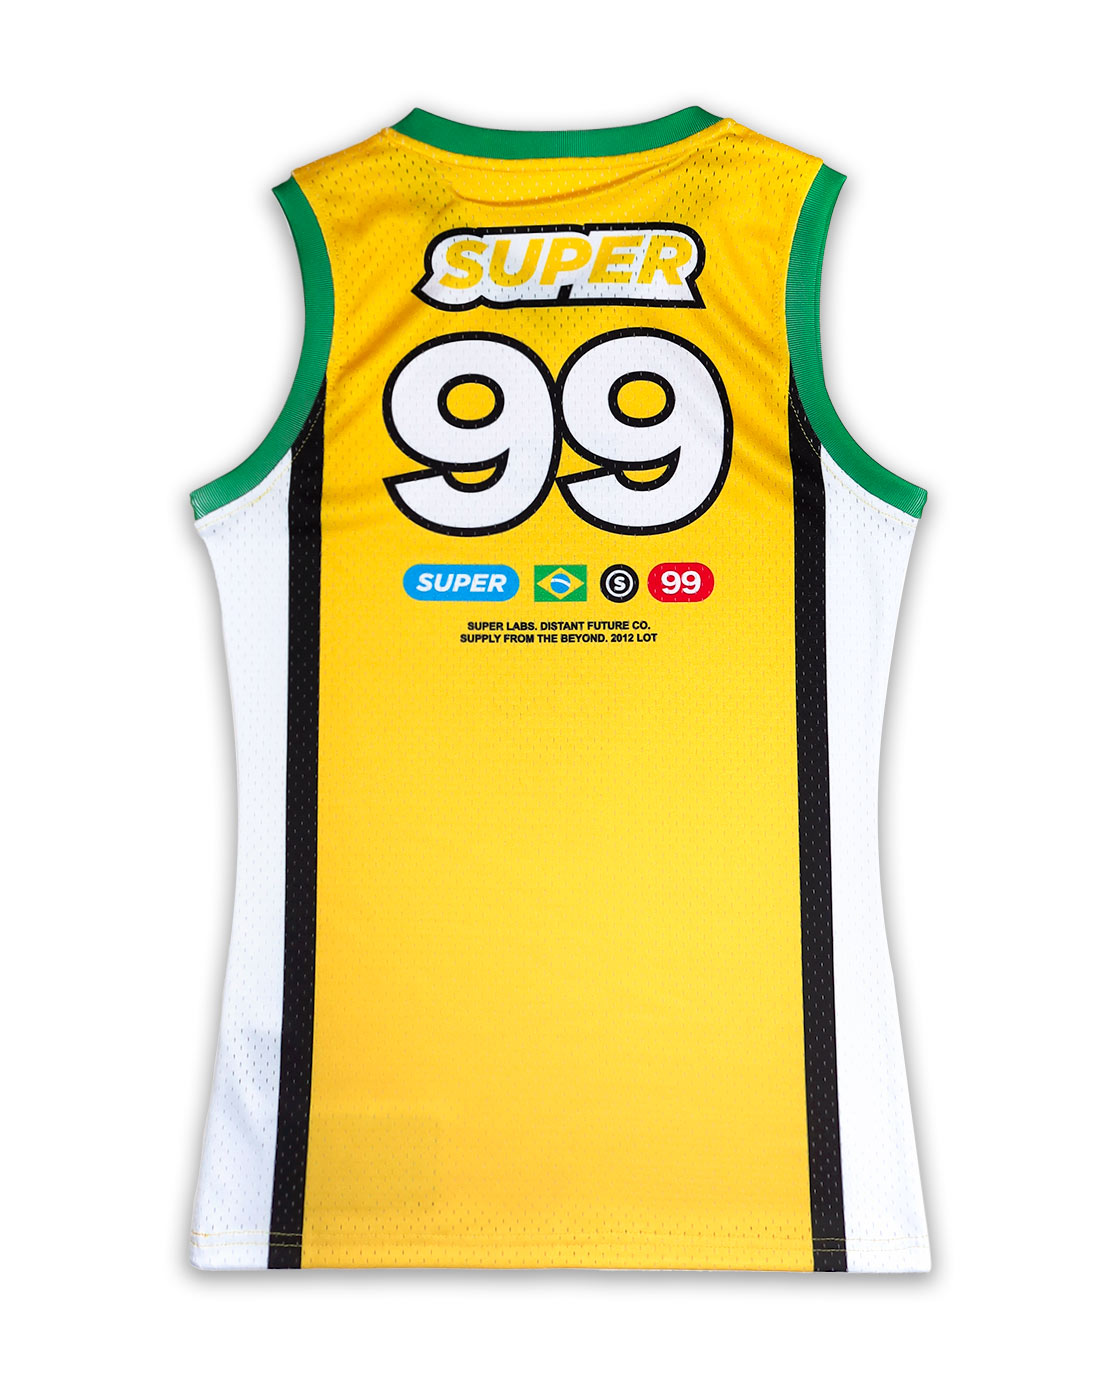 Rear view of a  women's basketball jersey in yellow with green trim, featuring lightweight mesh fabric and Brazilian flag-inspired graphics.